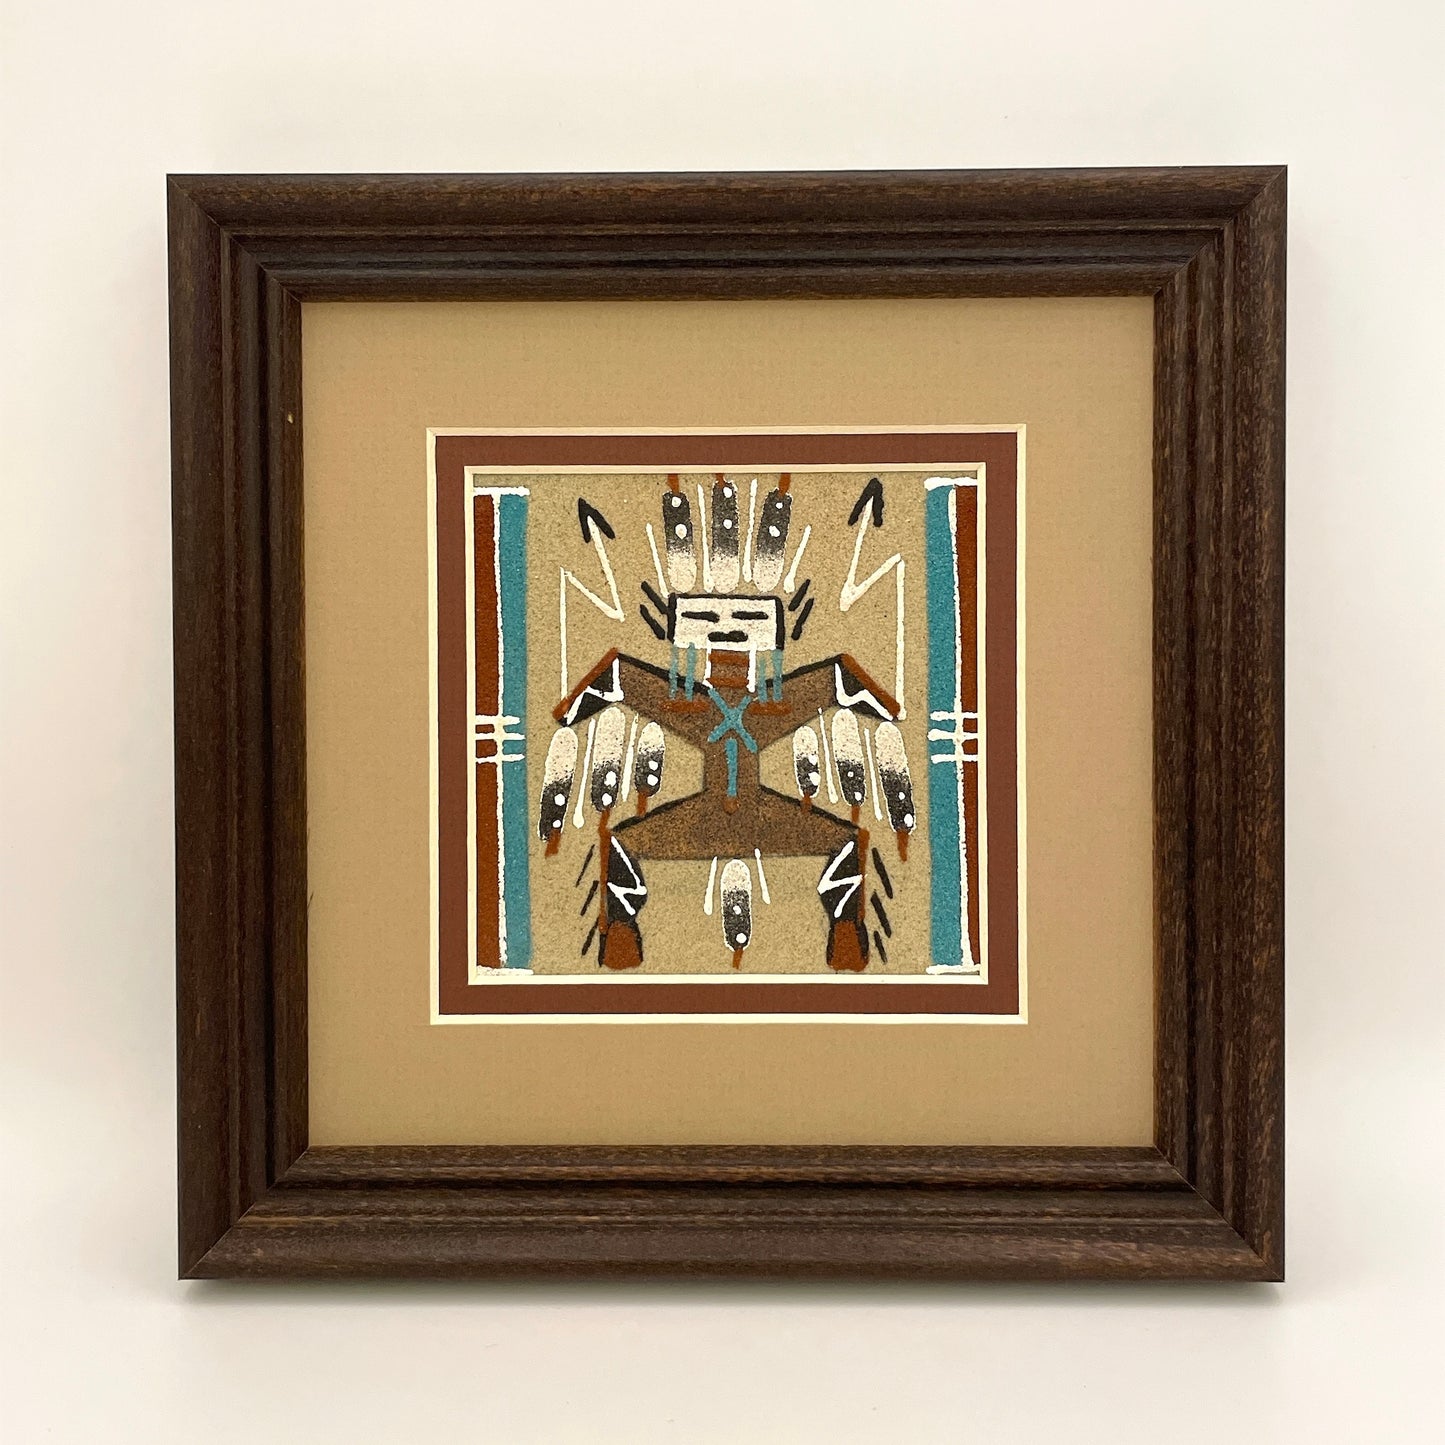 Navajo Sand Painting By Marlene Doby 7" x 7"